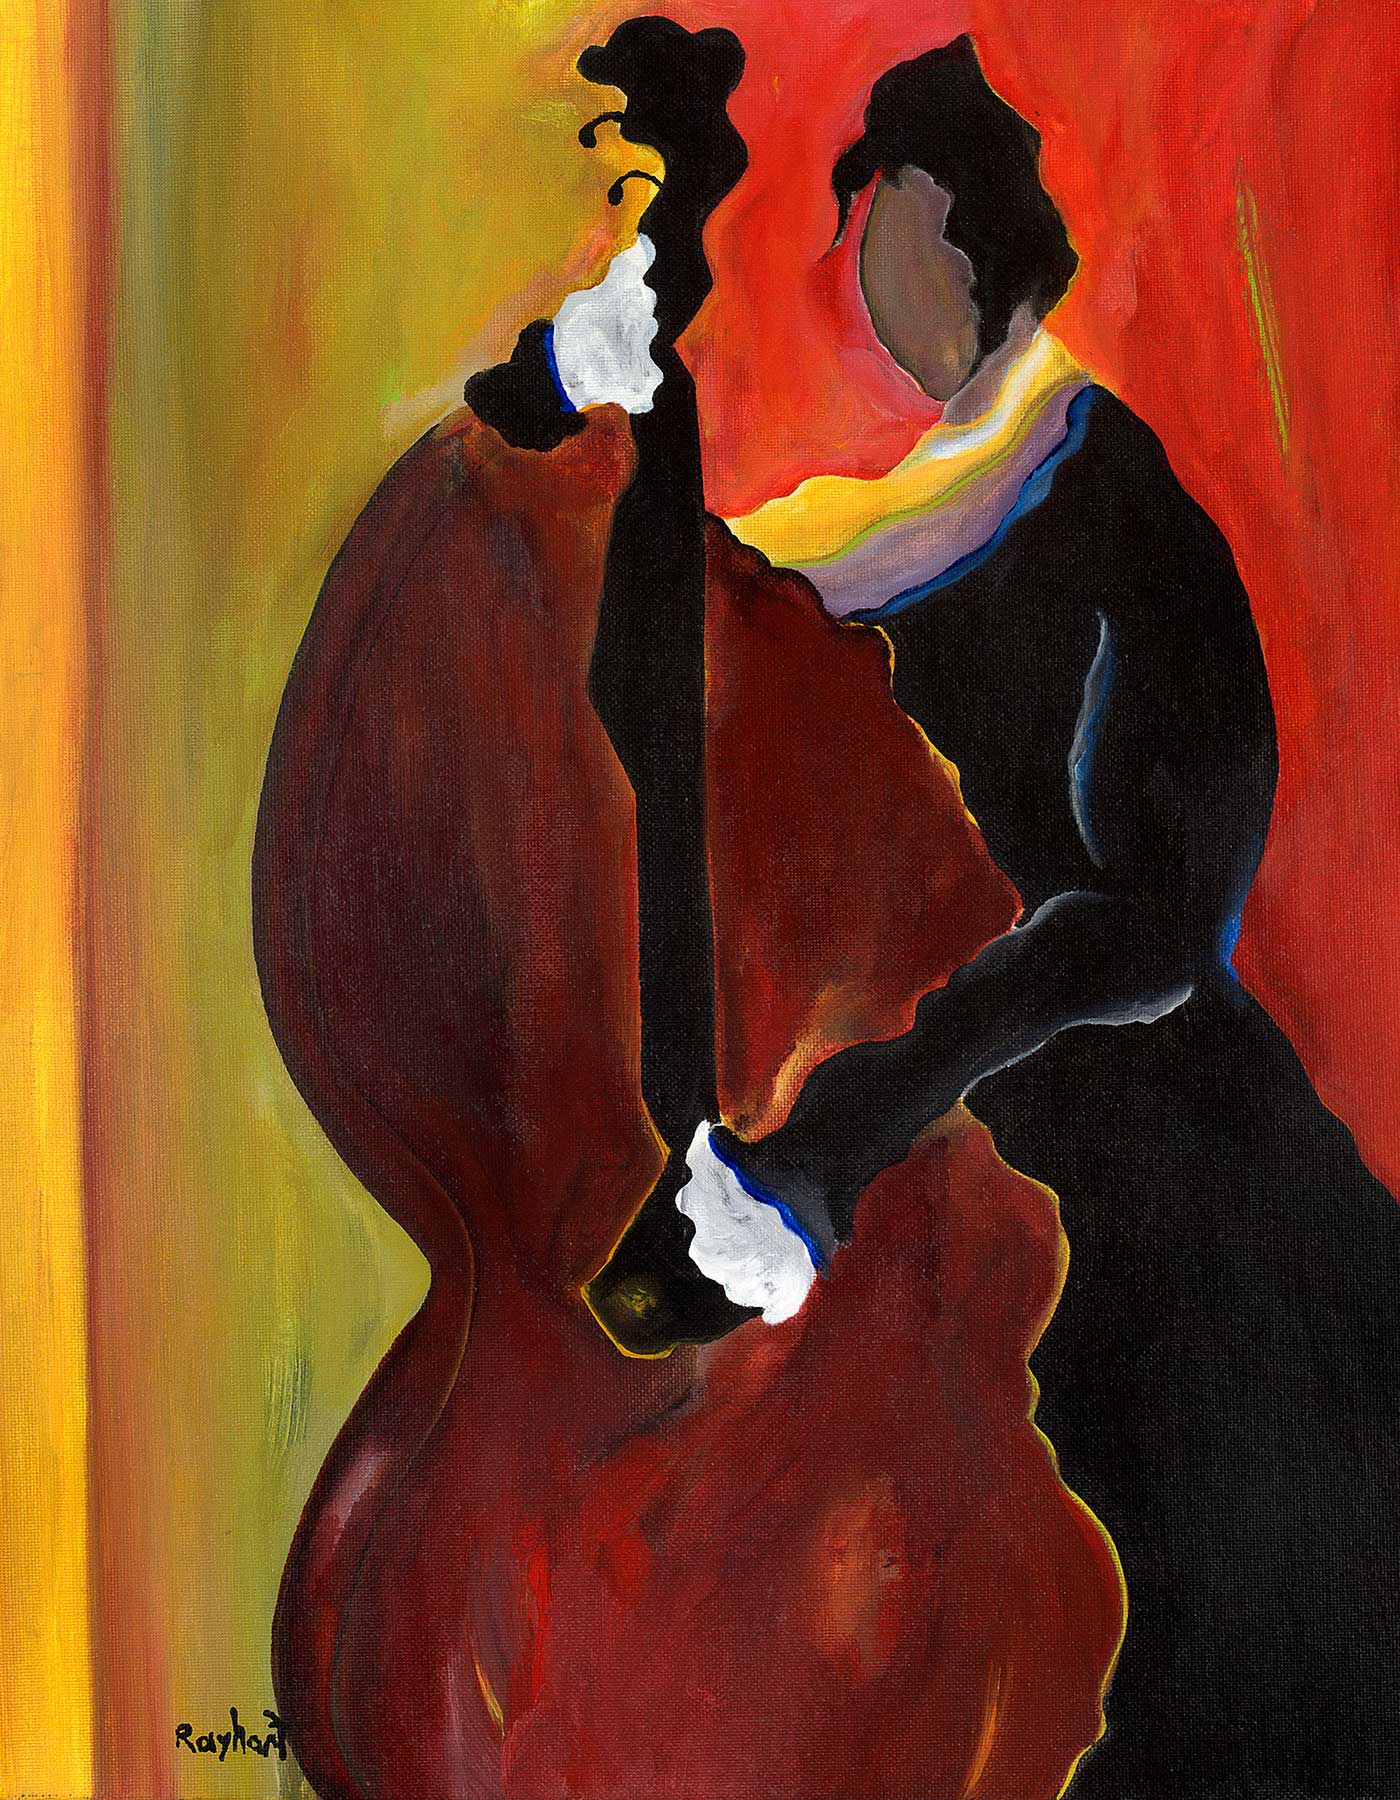 The Bassist Revisited - Sold